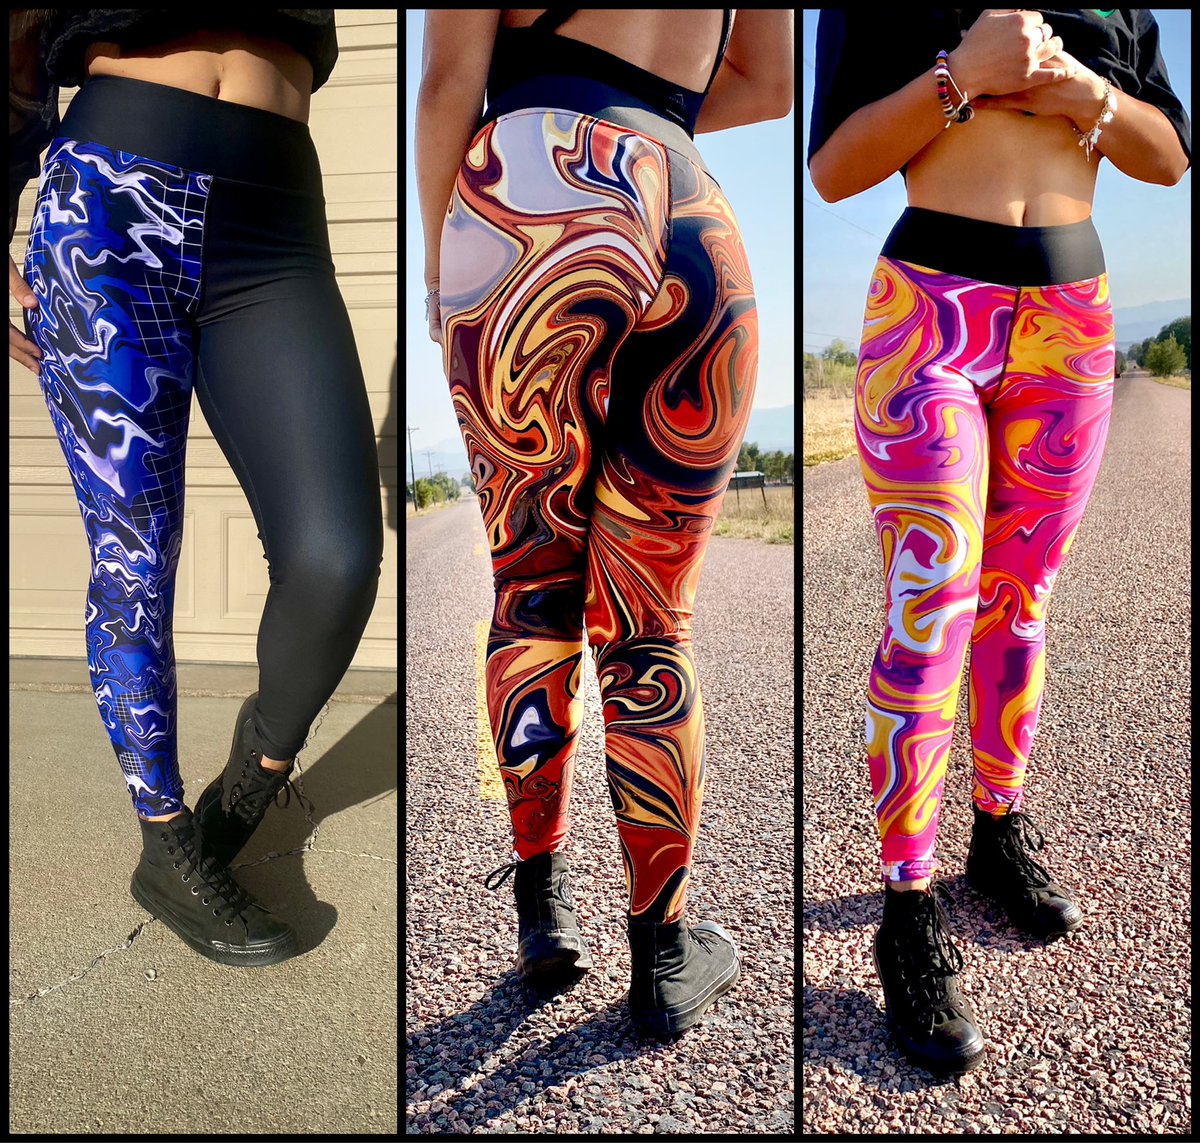 CyberGitch, Orange Inferno & Pink Sherbet Yoga Leggings all available in XS- XL for $32 (sale applied)